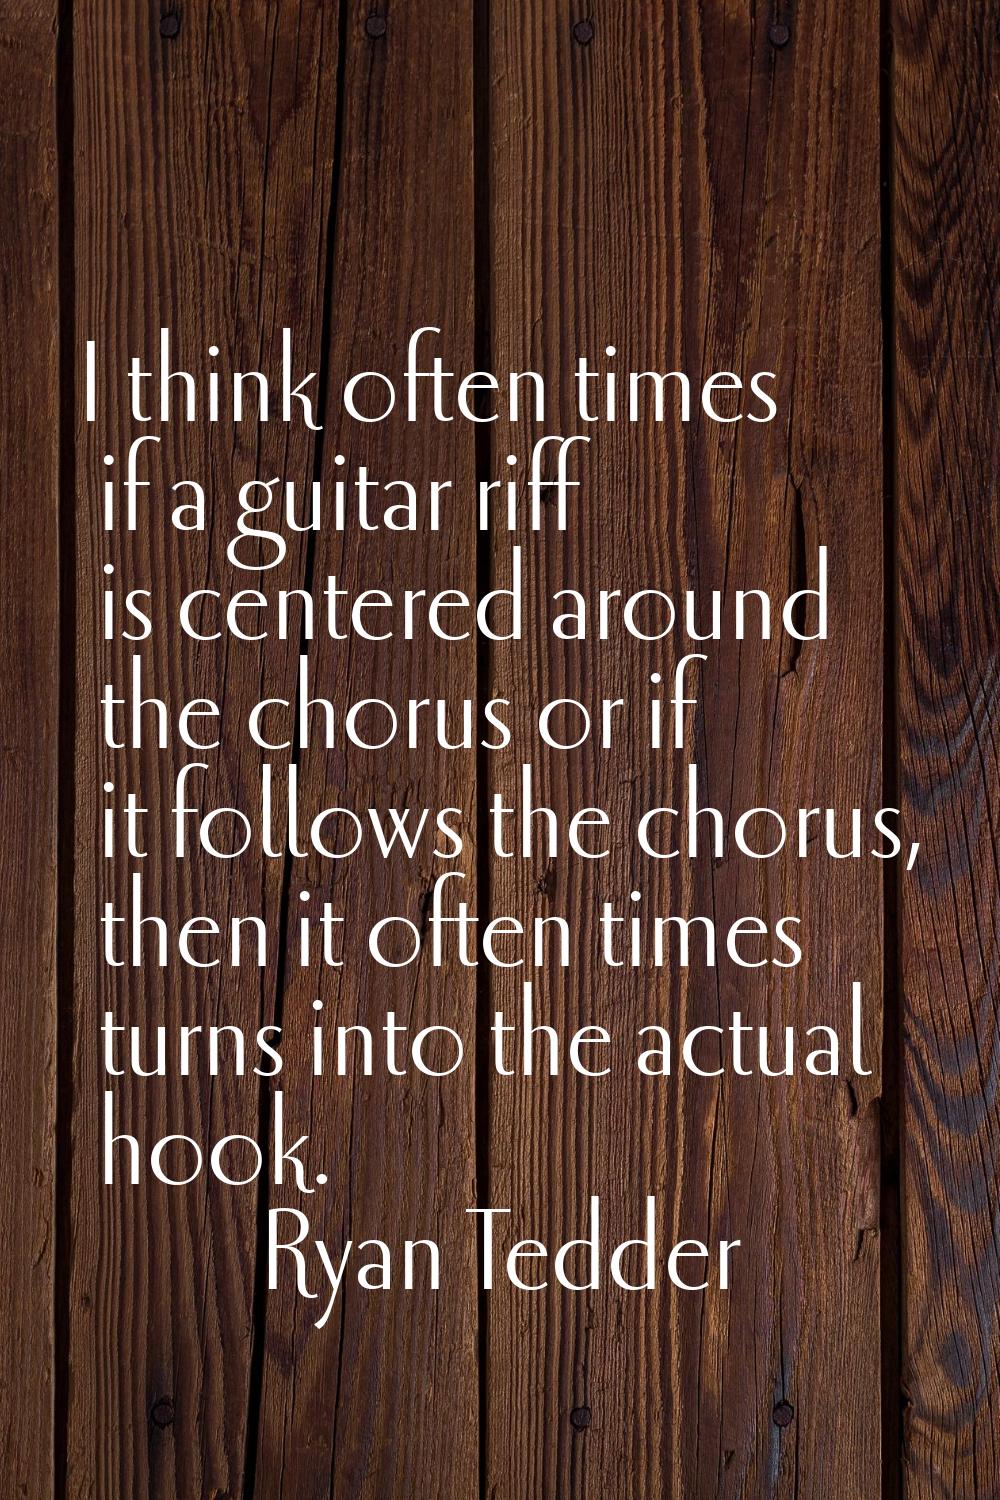 I think often times if a guitar riff is centered around the chorus or if it follows the chorus, the